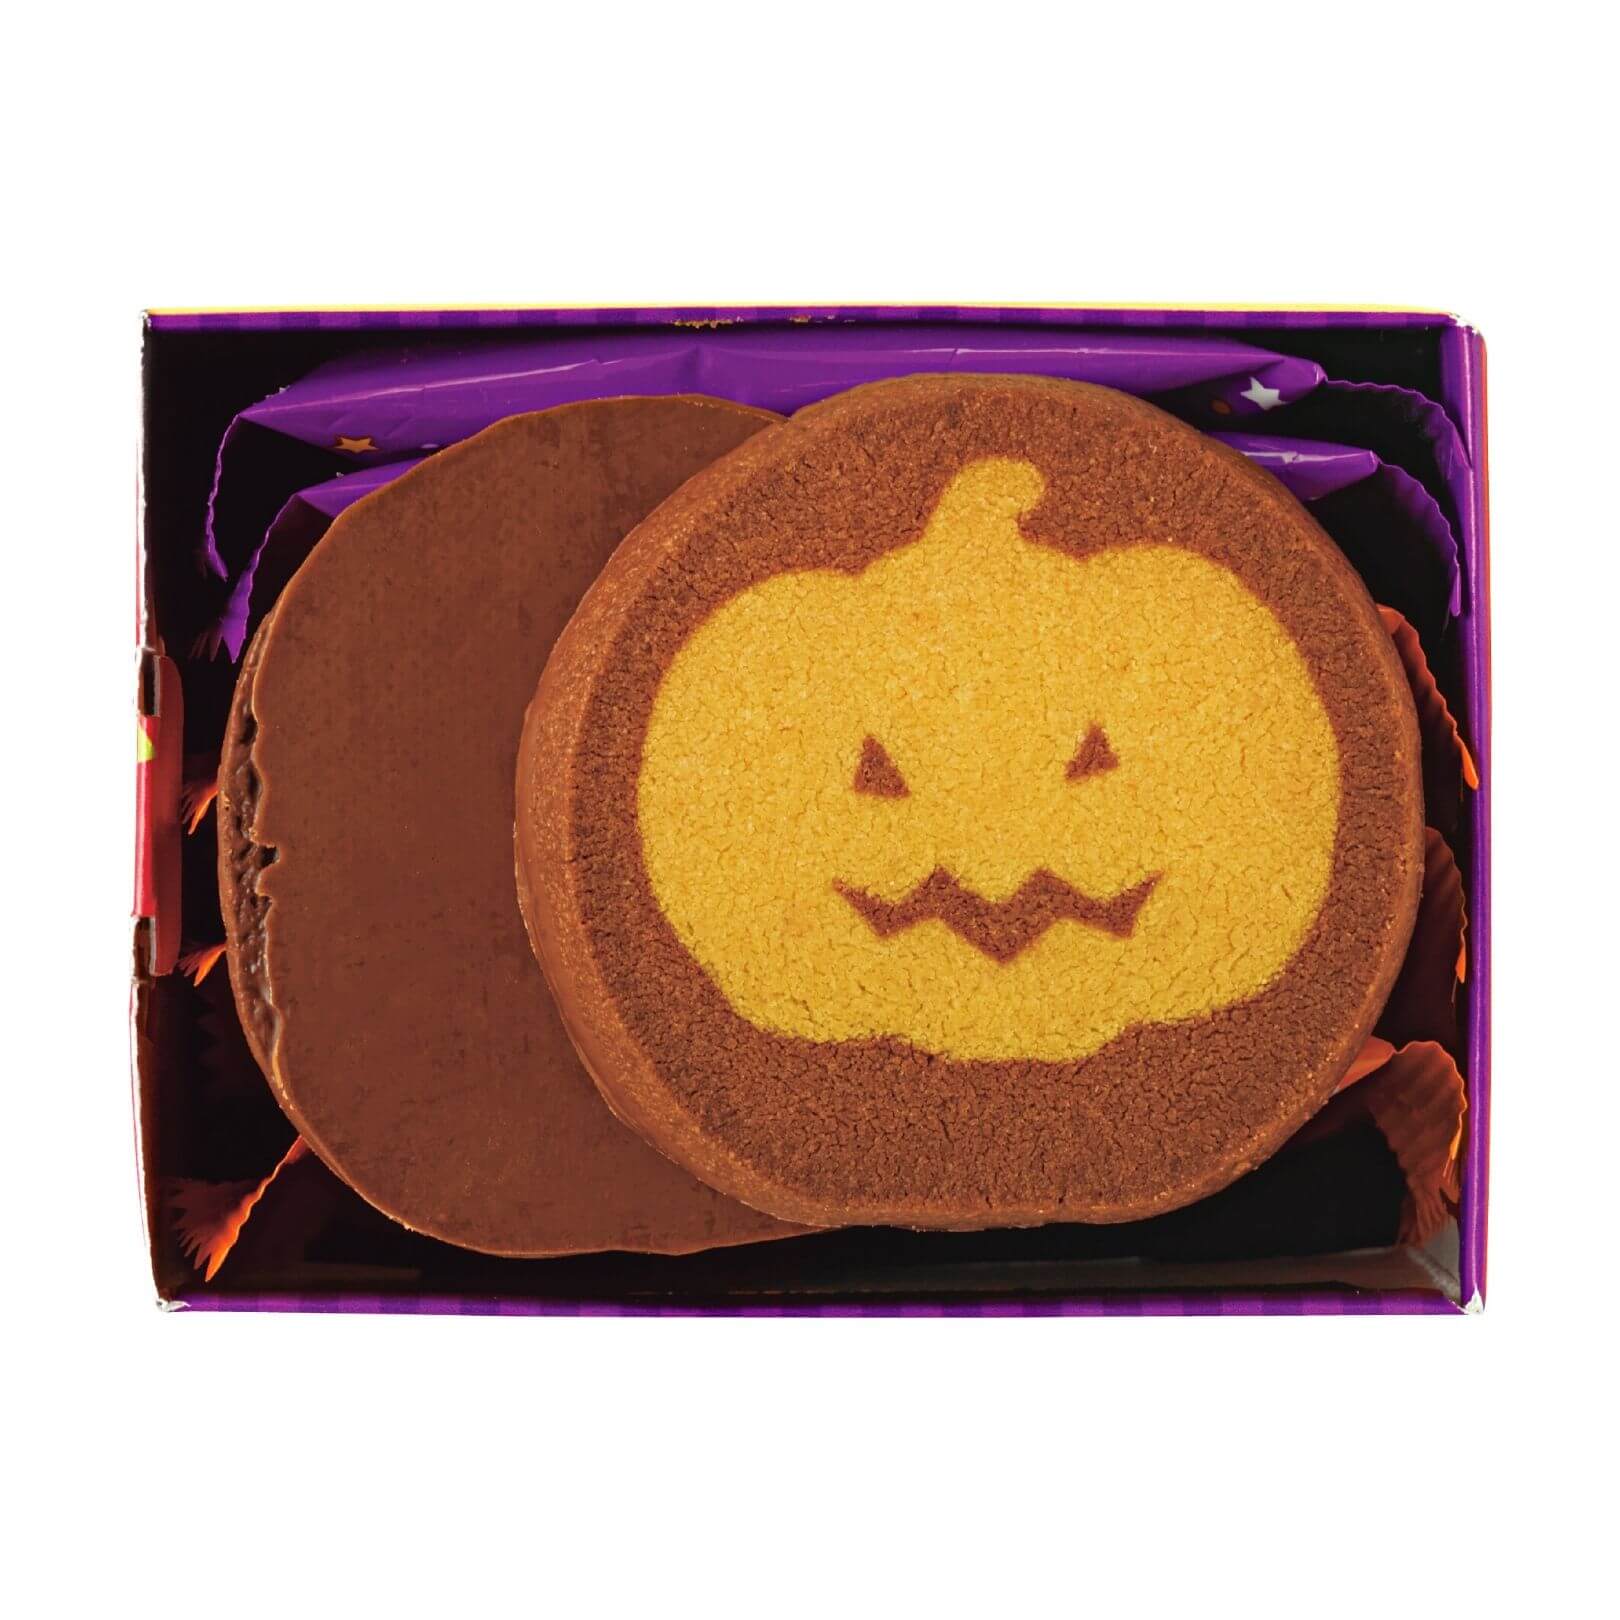 Image shows a box cookies in yellow and brown with a pumpkin illustration with smiley face. Background is in color white.